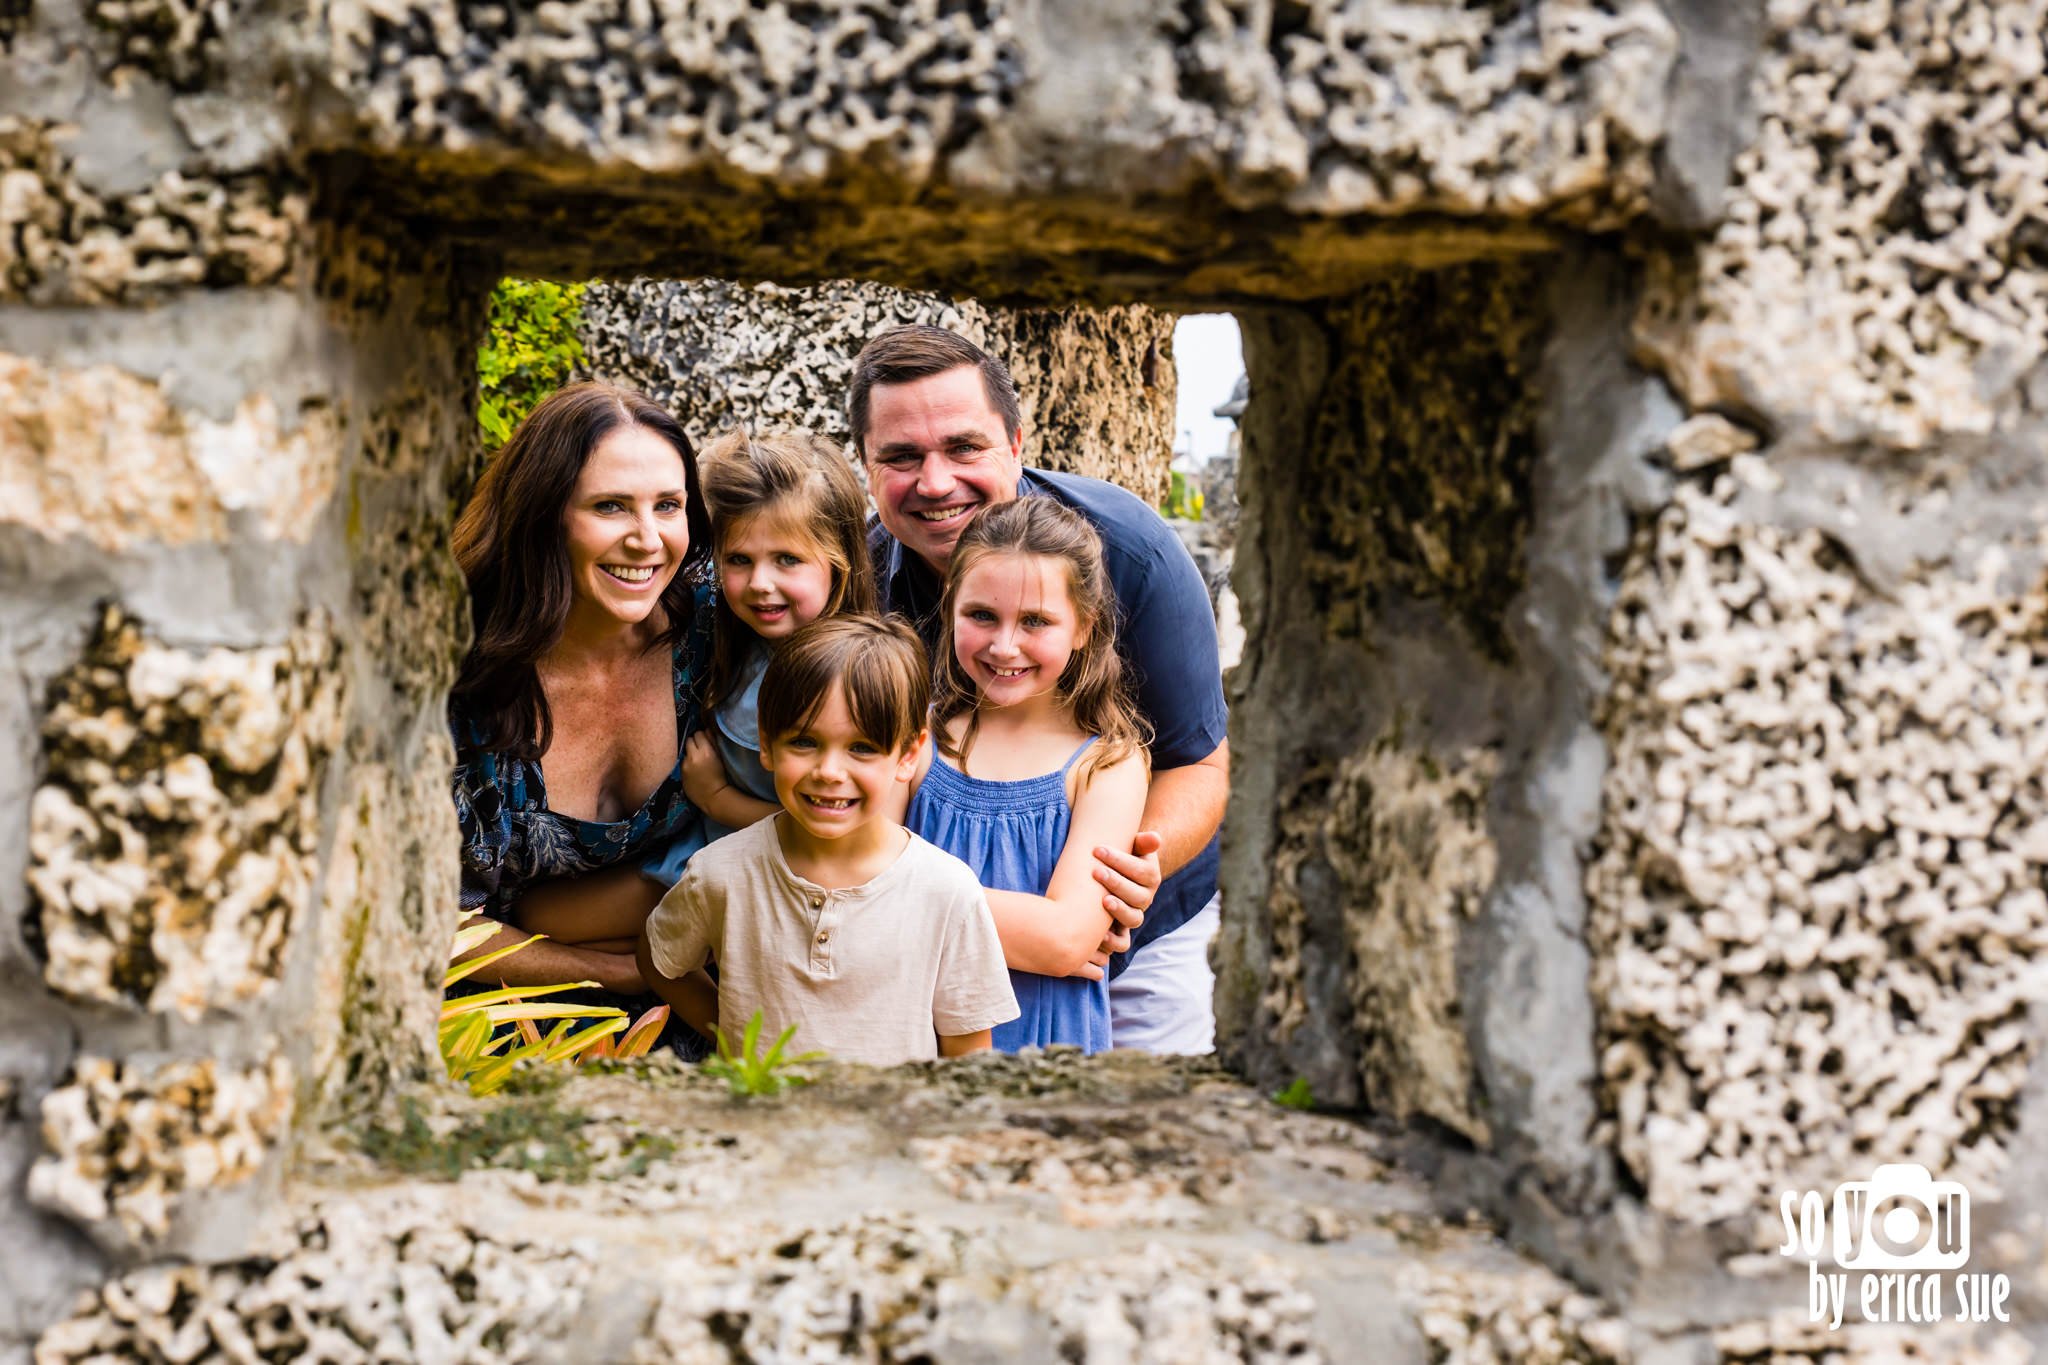 19-lifestyle-family-photographer-coral-castle-miami-fl-so-you-by-erica-sue-ES2_9468.jpg